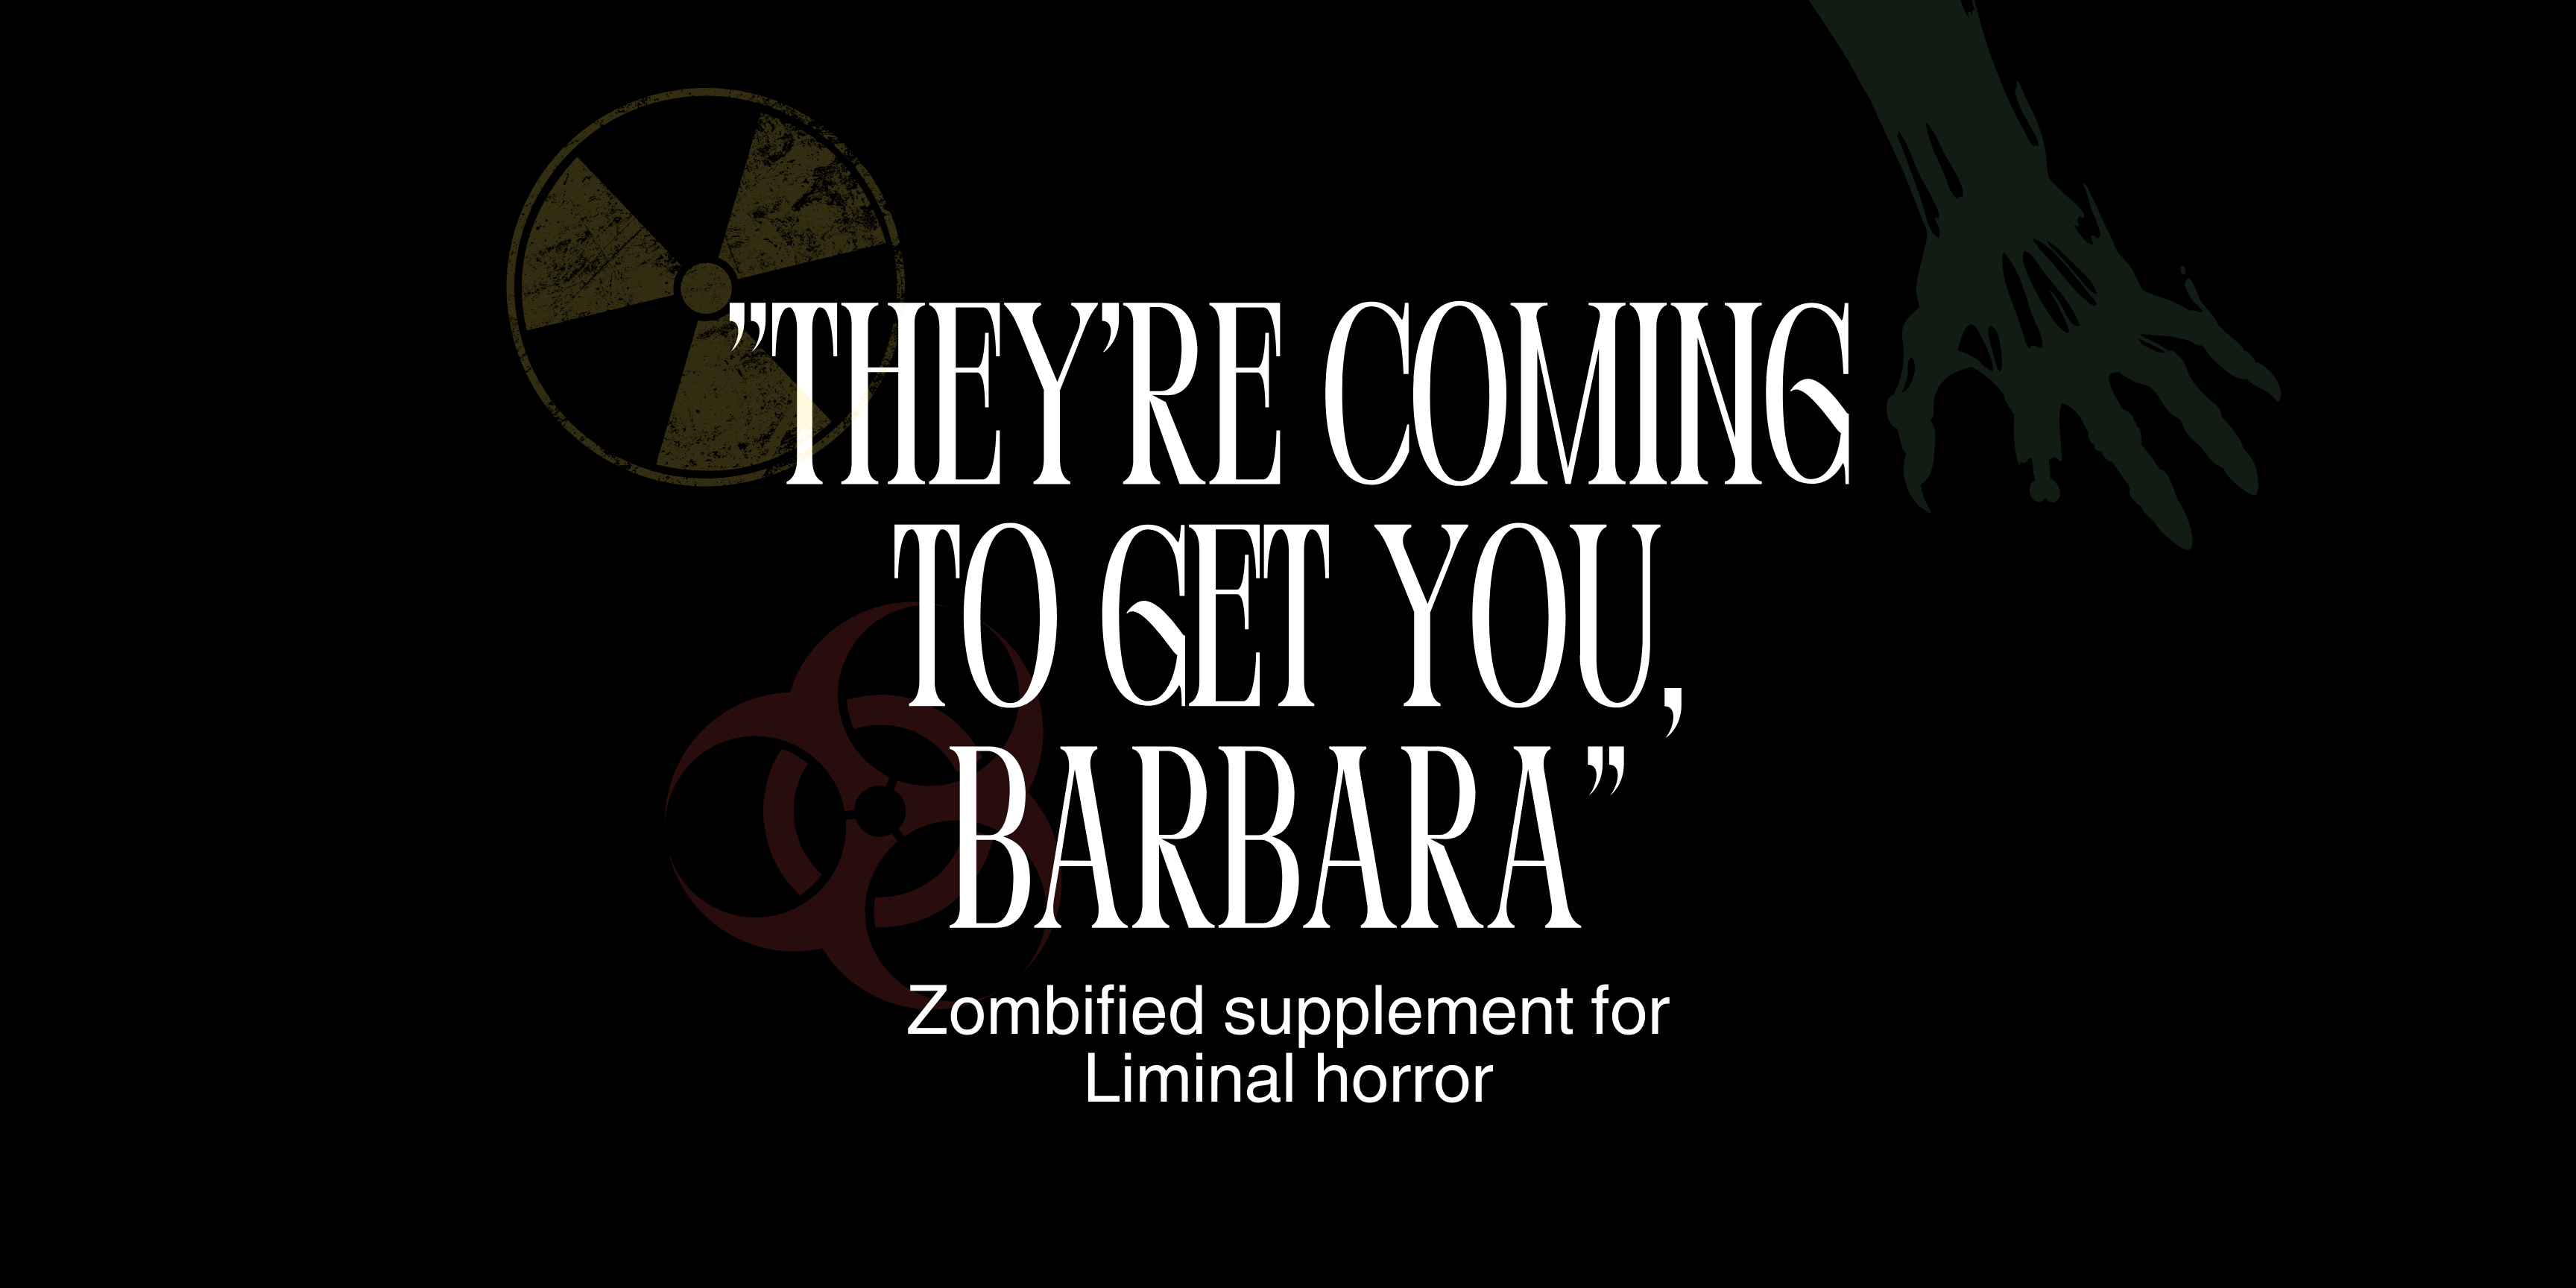 "They're coming to get you, Barbara" - Liminal Horror supplement